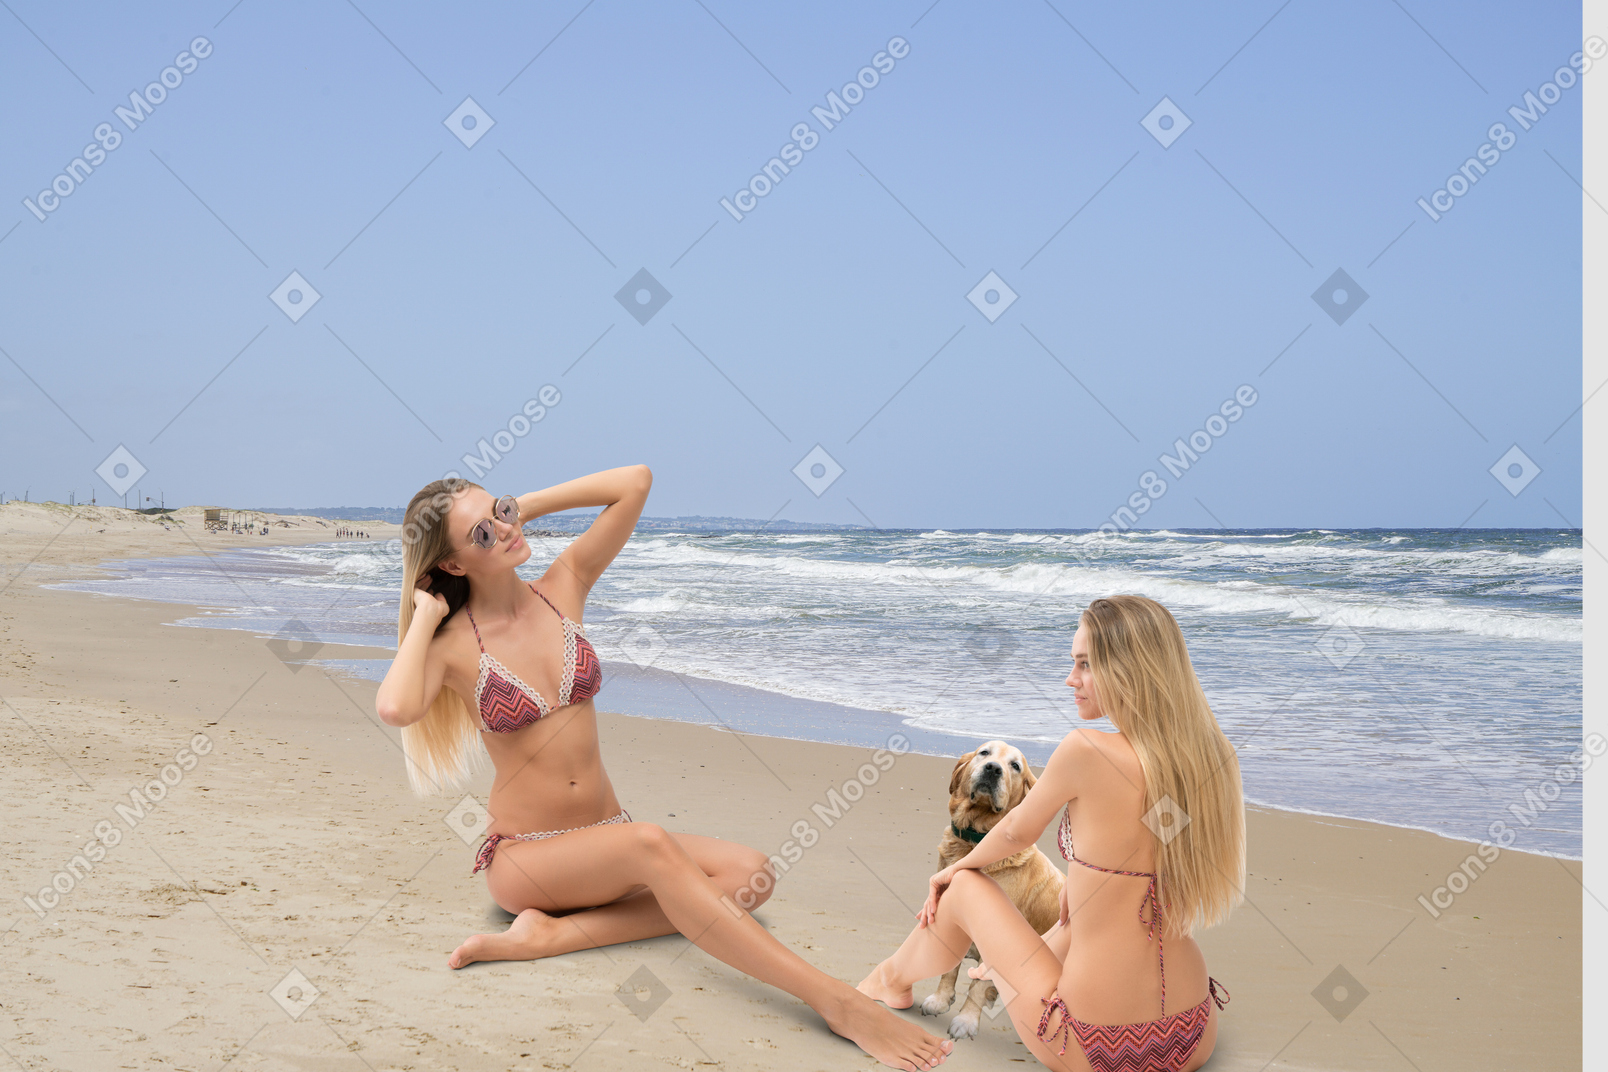 Two women in bikinis sitting on the beach with a dog